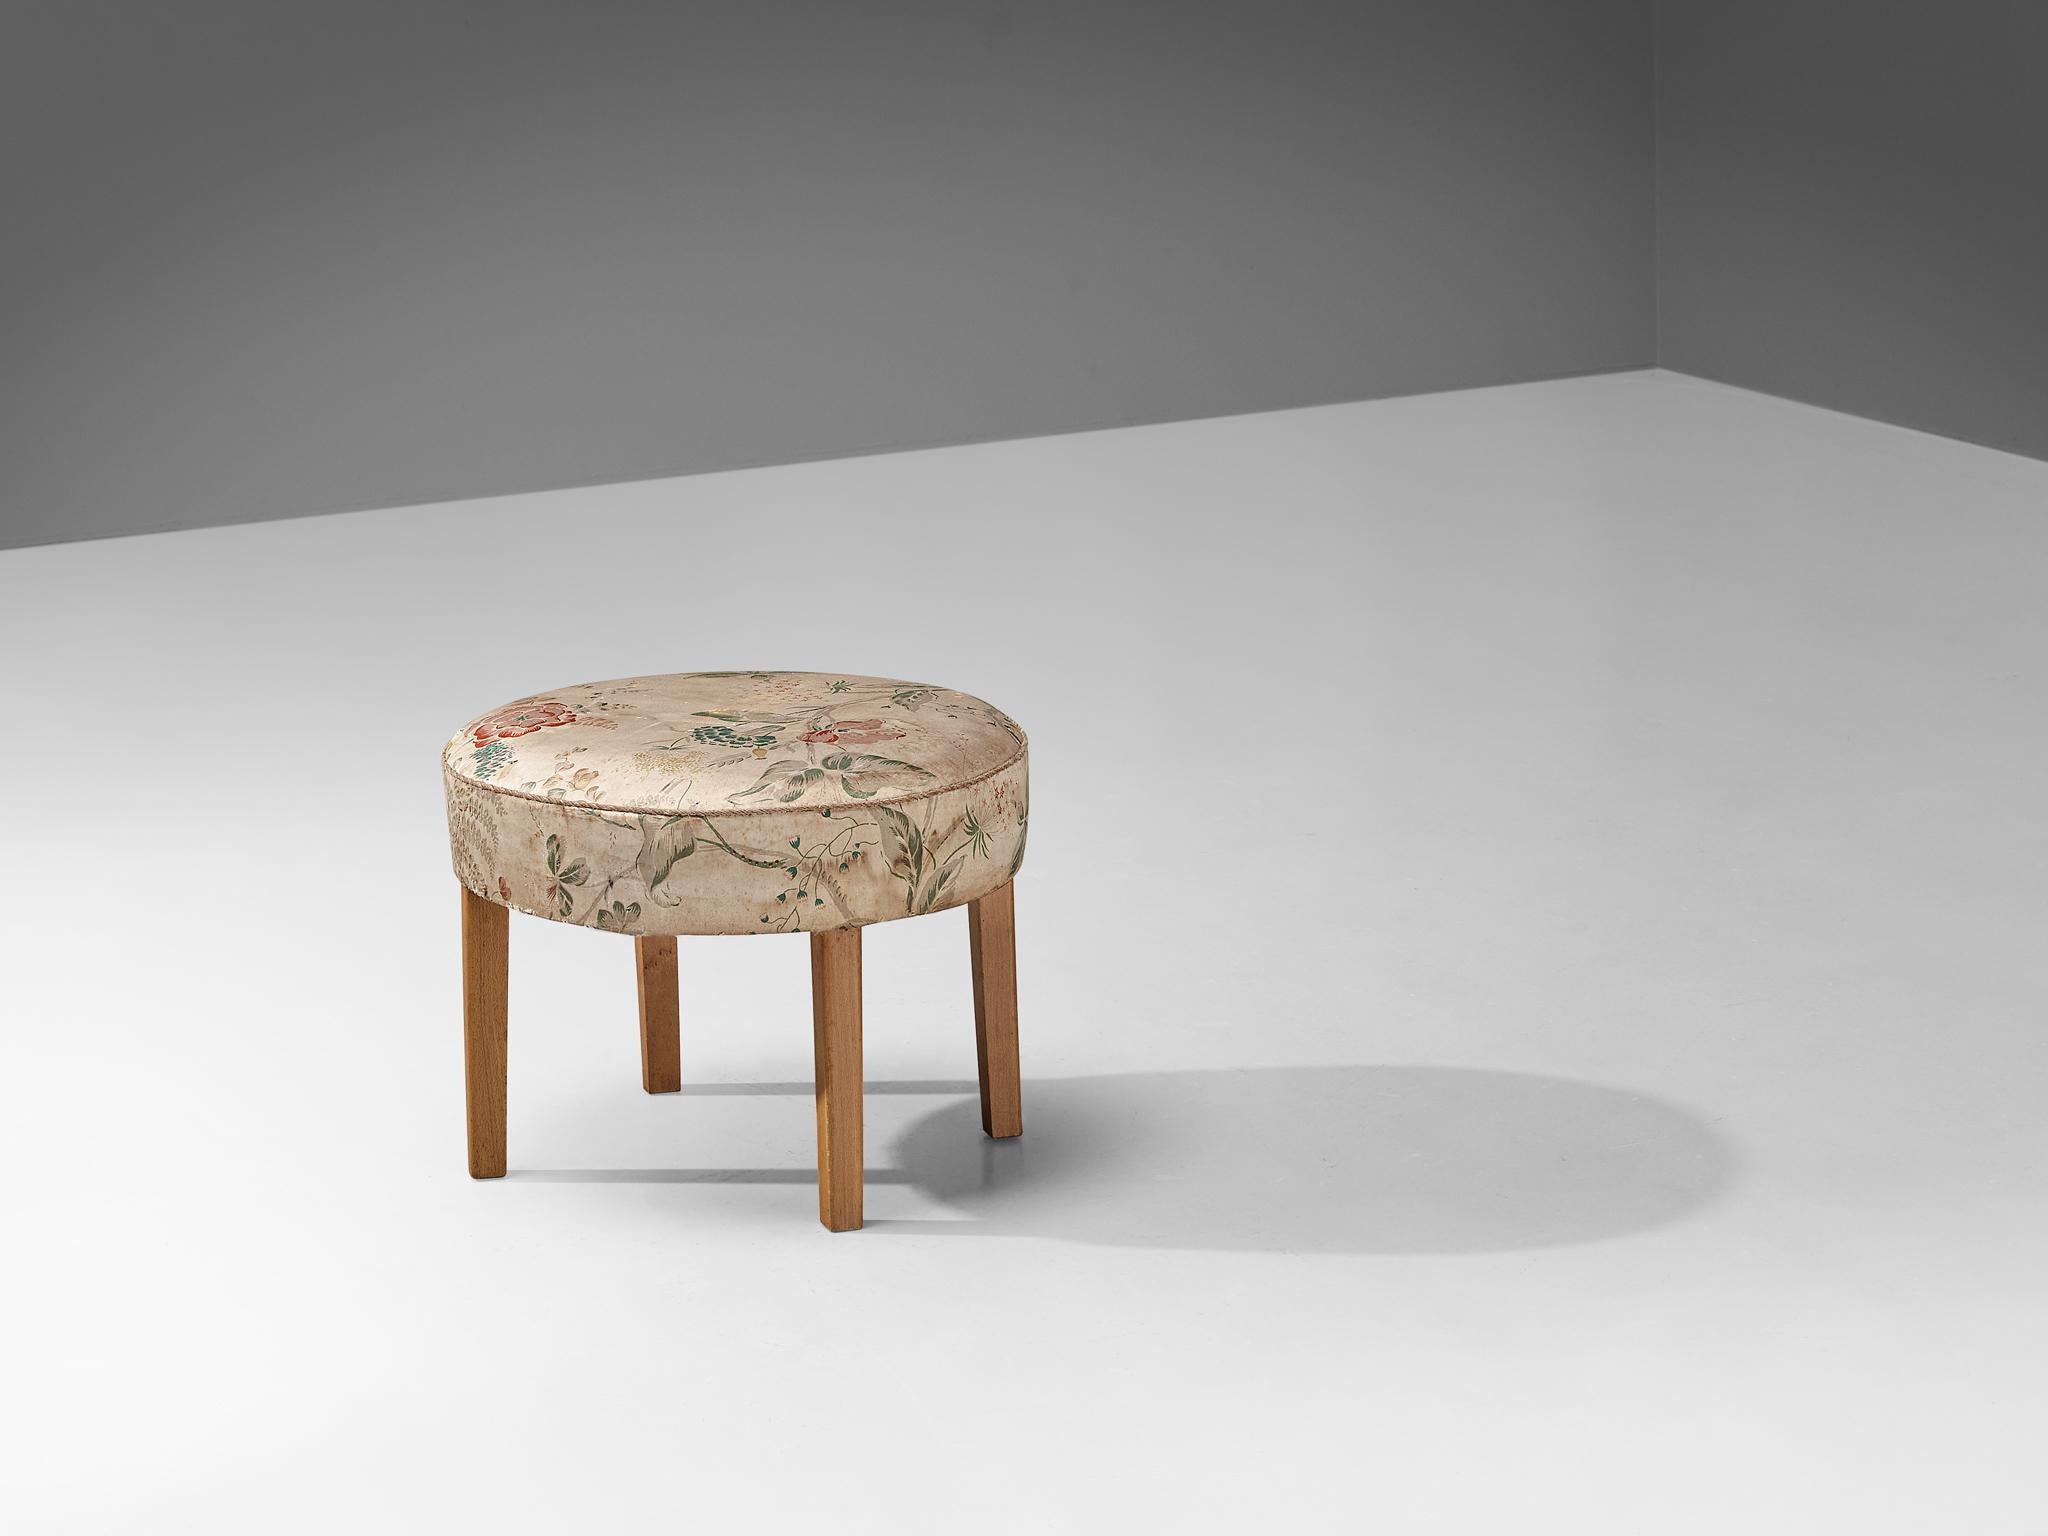 Stool, tabouret, ottoman, fabric, stained wood, Scandinavia, 1940s.

This poetic pouf is designed in the 1940s and is a charming emergence in an interior or space. In this design a harmonious appearance is displayed, a sturdy base in combination